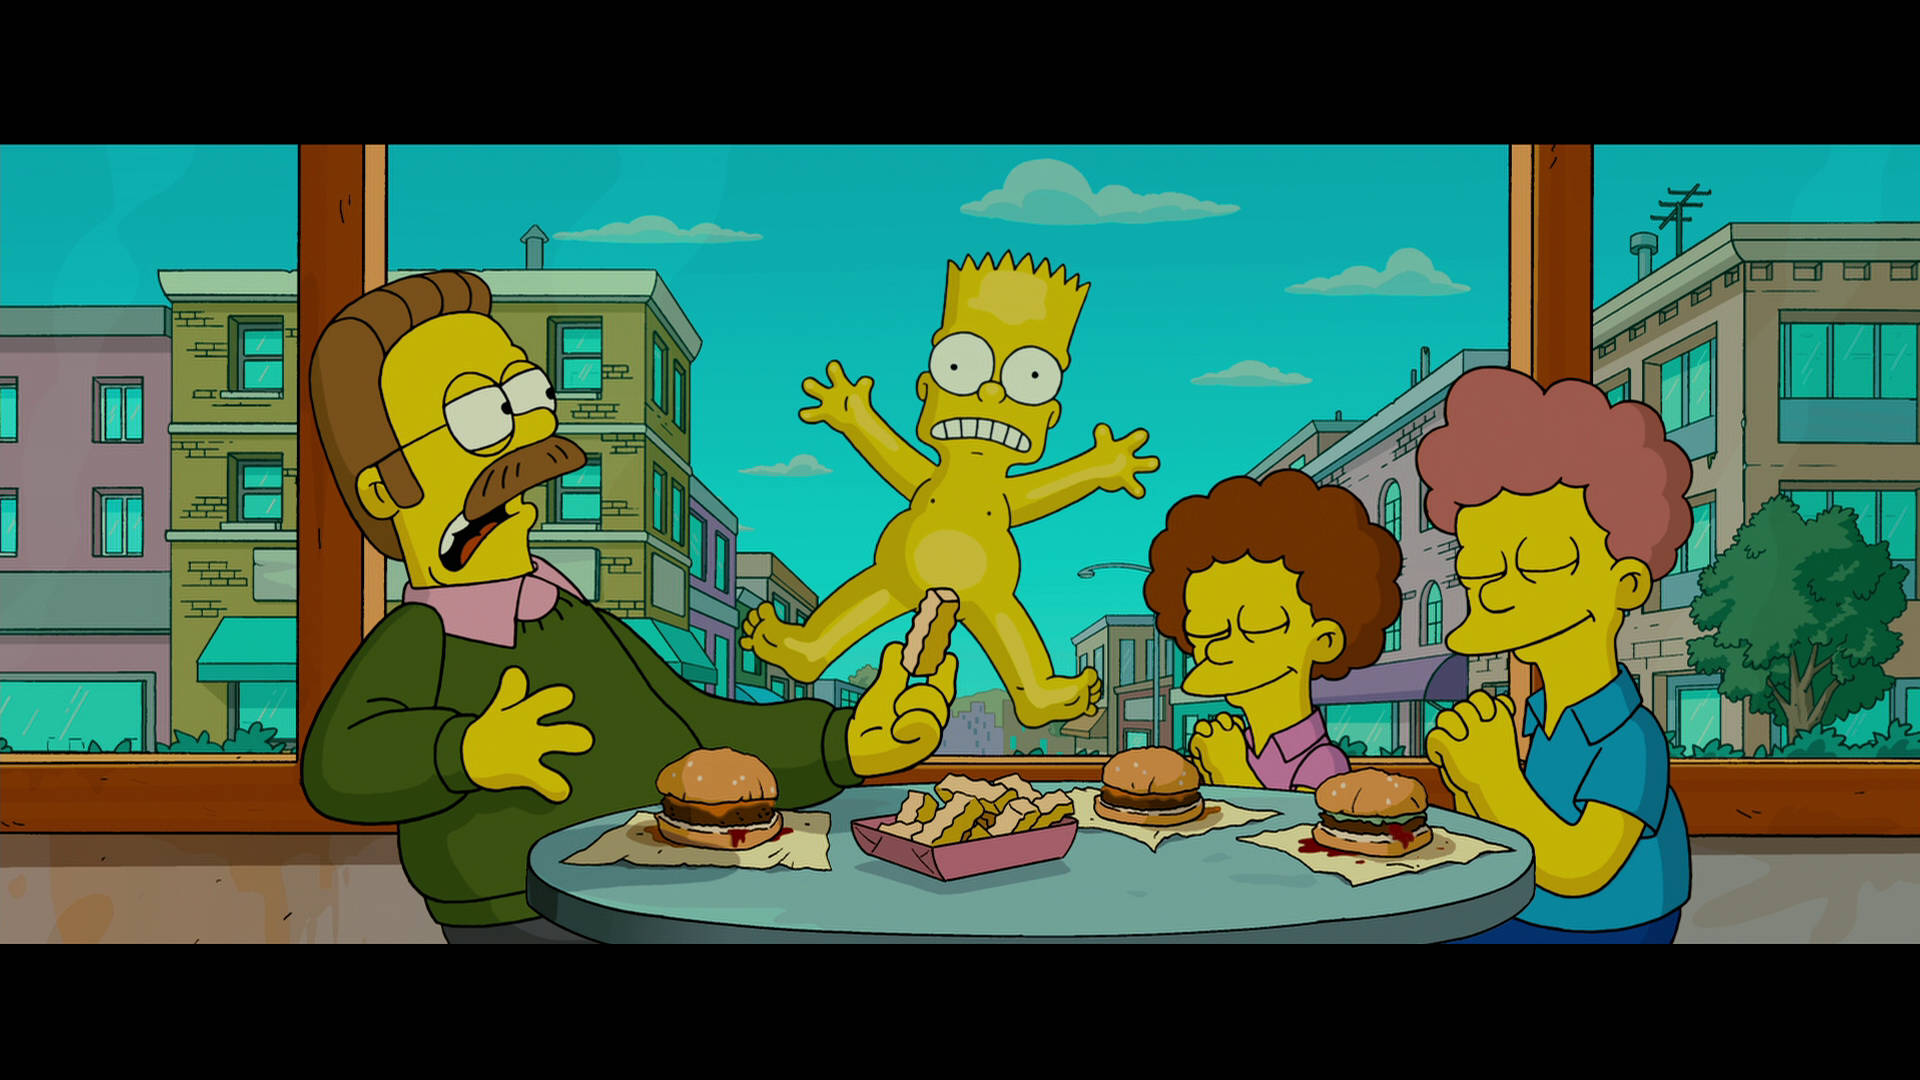 Funny Scene From The Simpsons Movie Wallpaper